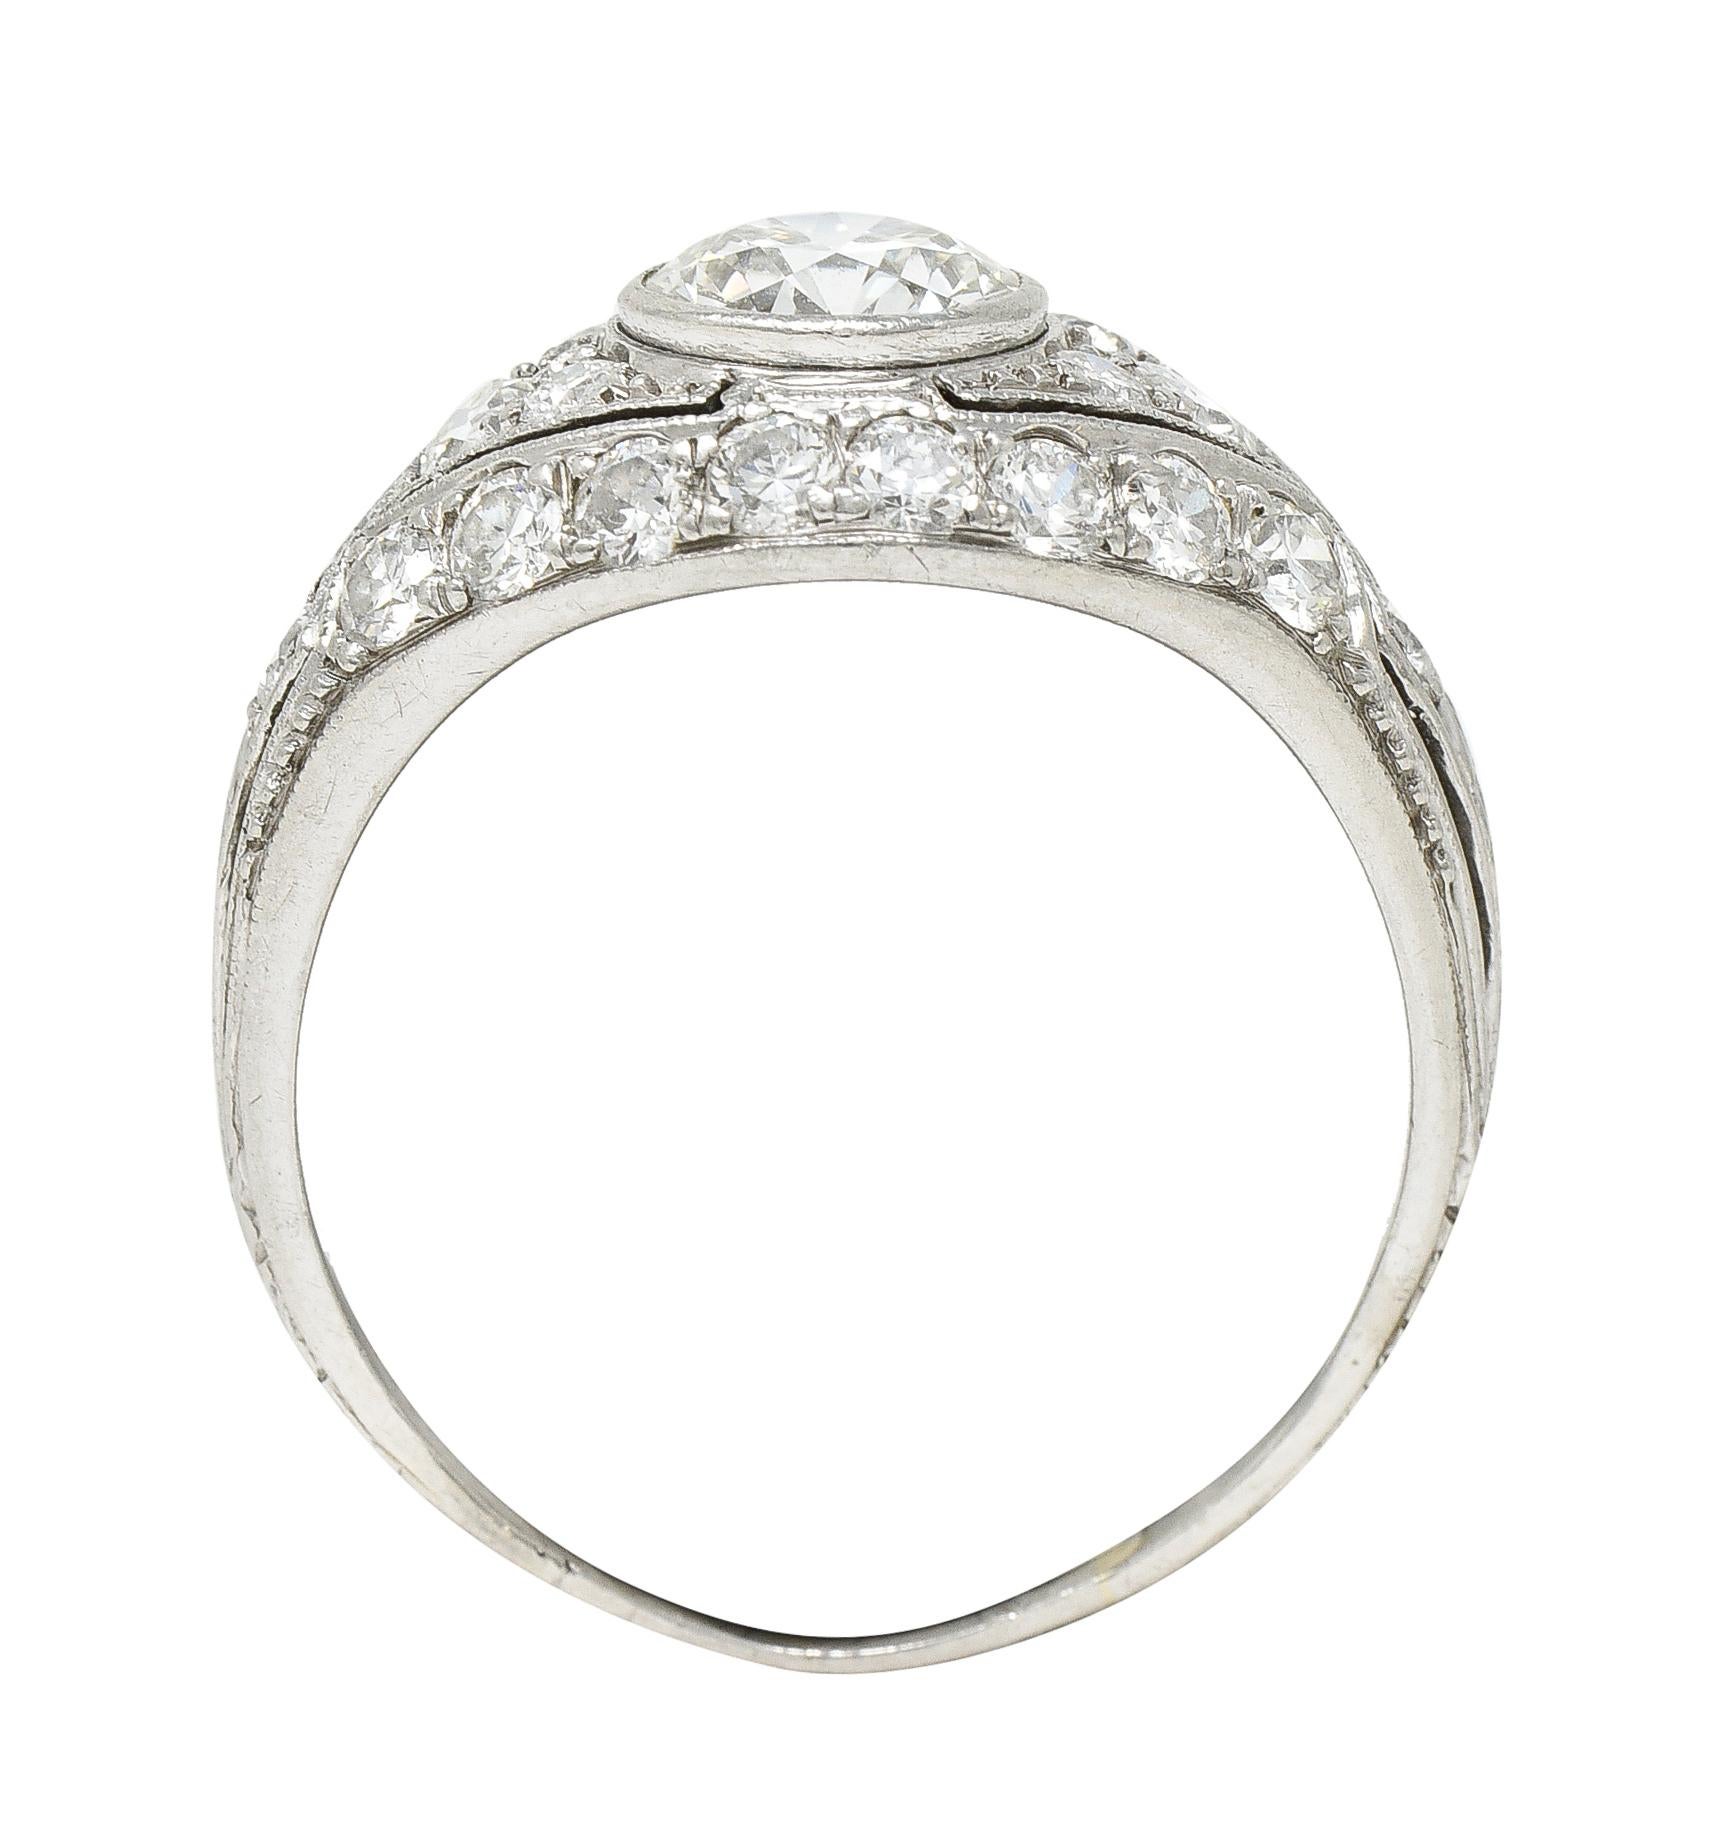 Marcus and Co. Art Deco 1.95 Carats Diamond Platinum Bombè Band Engagement Ring For Sale 2